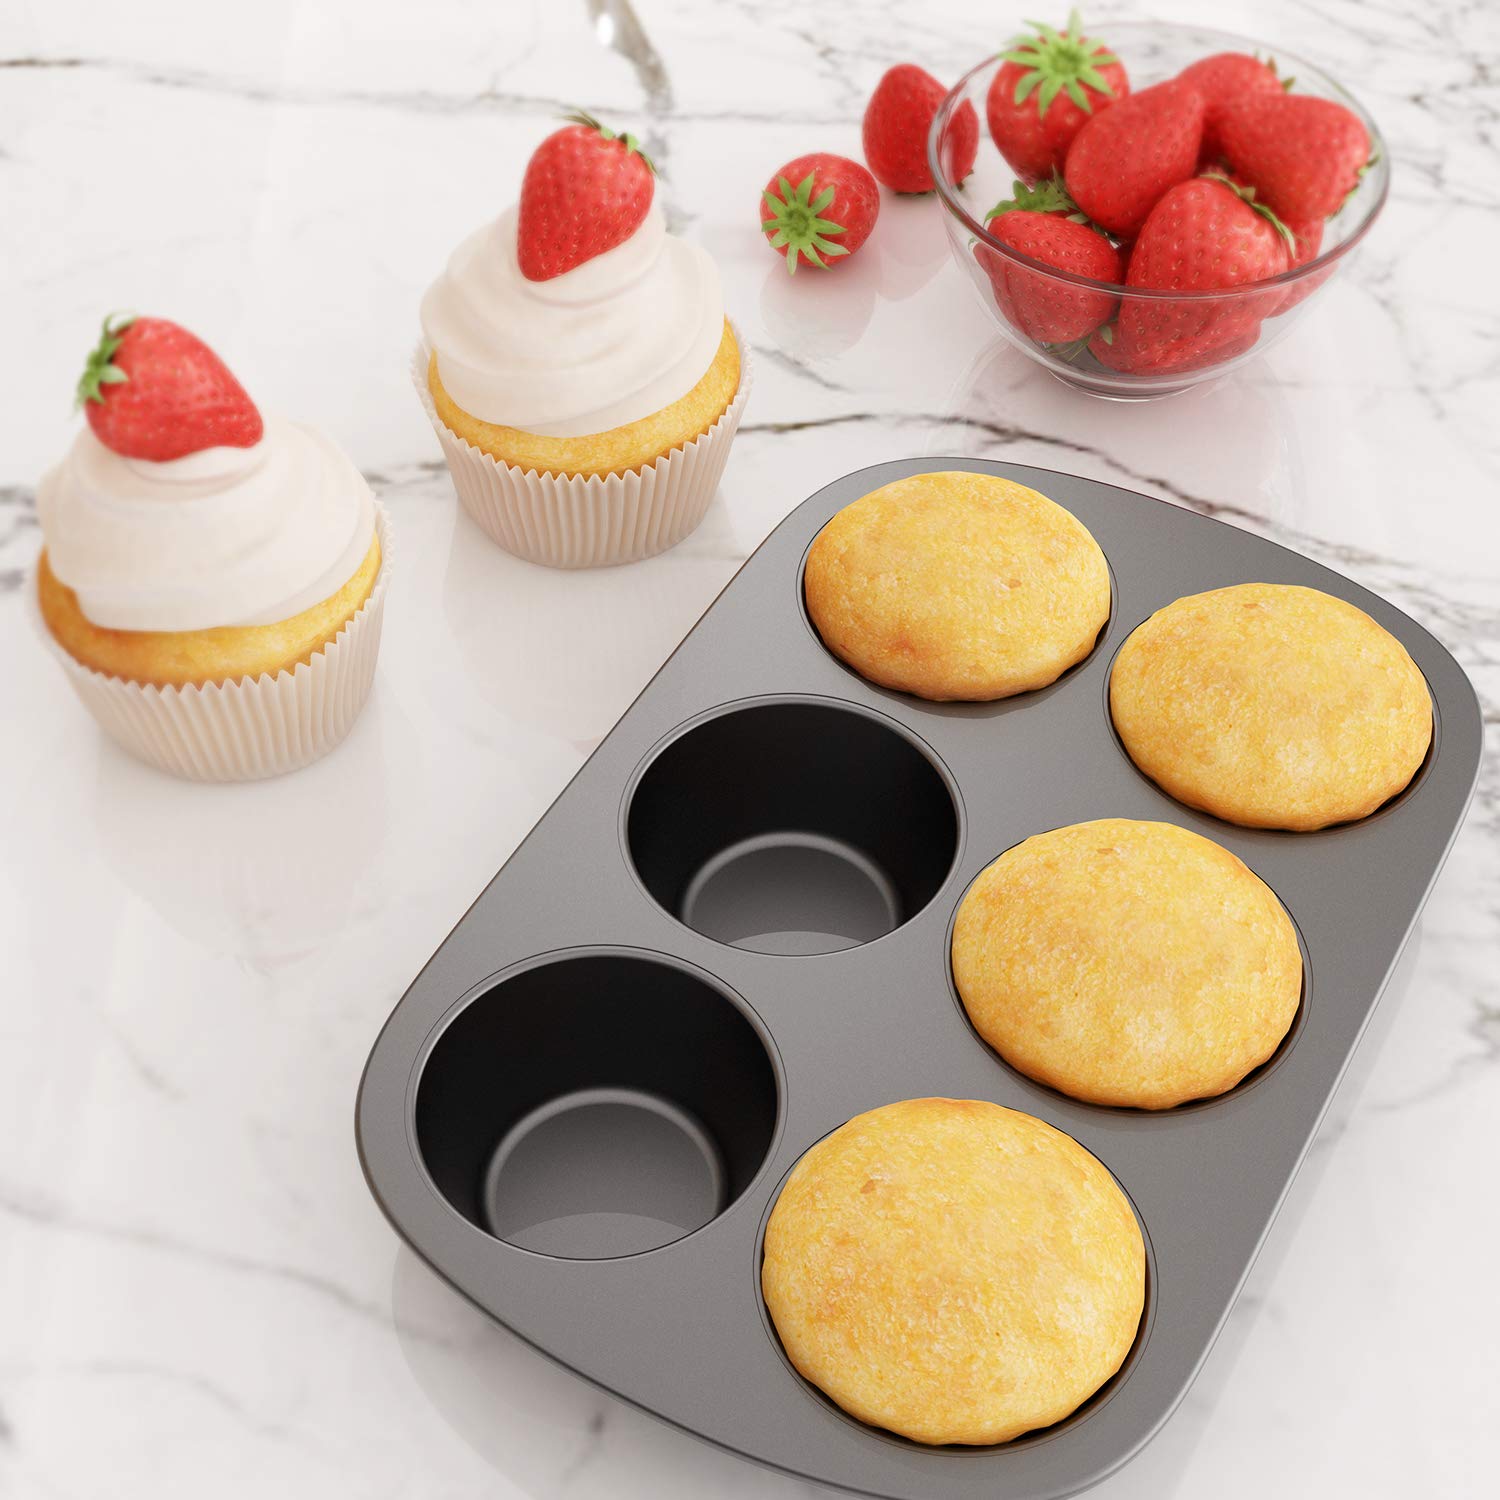 Tiawudi 2 Pack Nonstick Muffin Pan, Carbon Steel Cupcake Pan, 6 Cup, Easy to Clean and Perfect for Making Muffins or Cupcakes, Jumbo